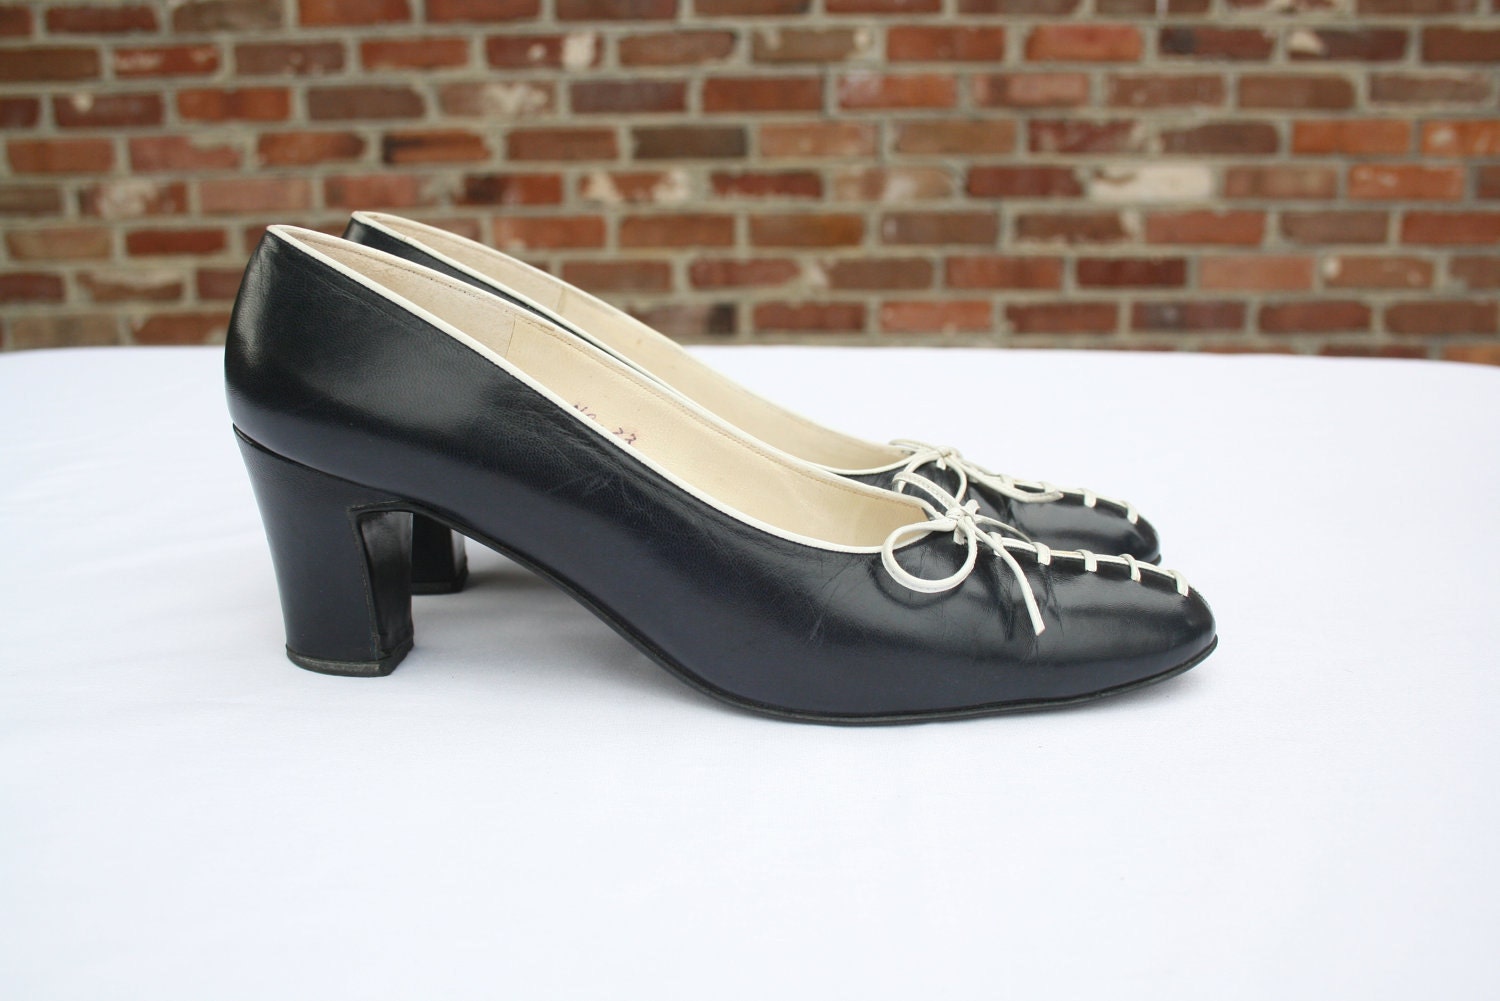 White Lace Up Vintage Navy Blue Pumps Size 6.5 by SteaminJunk